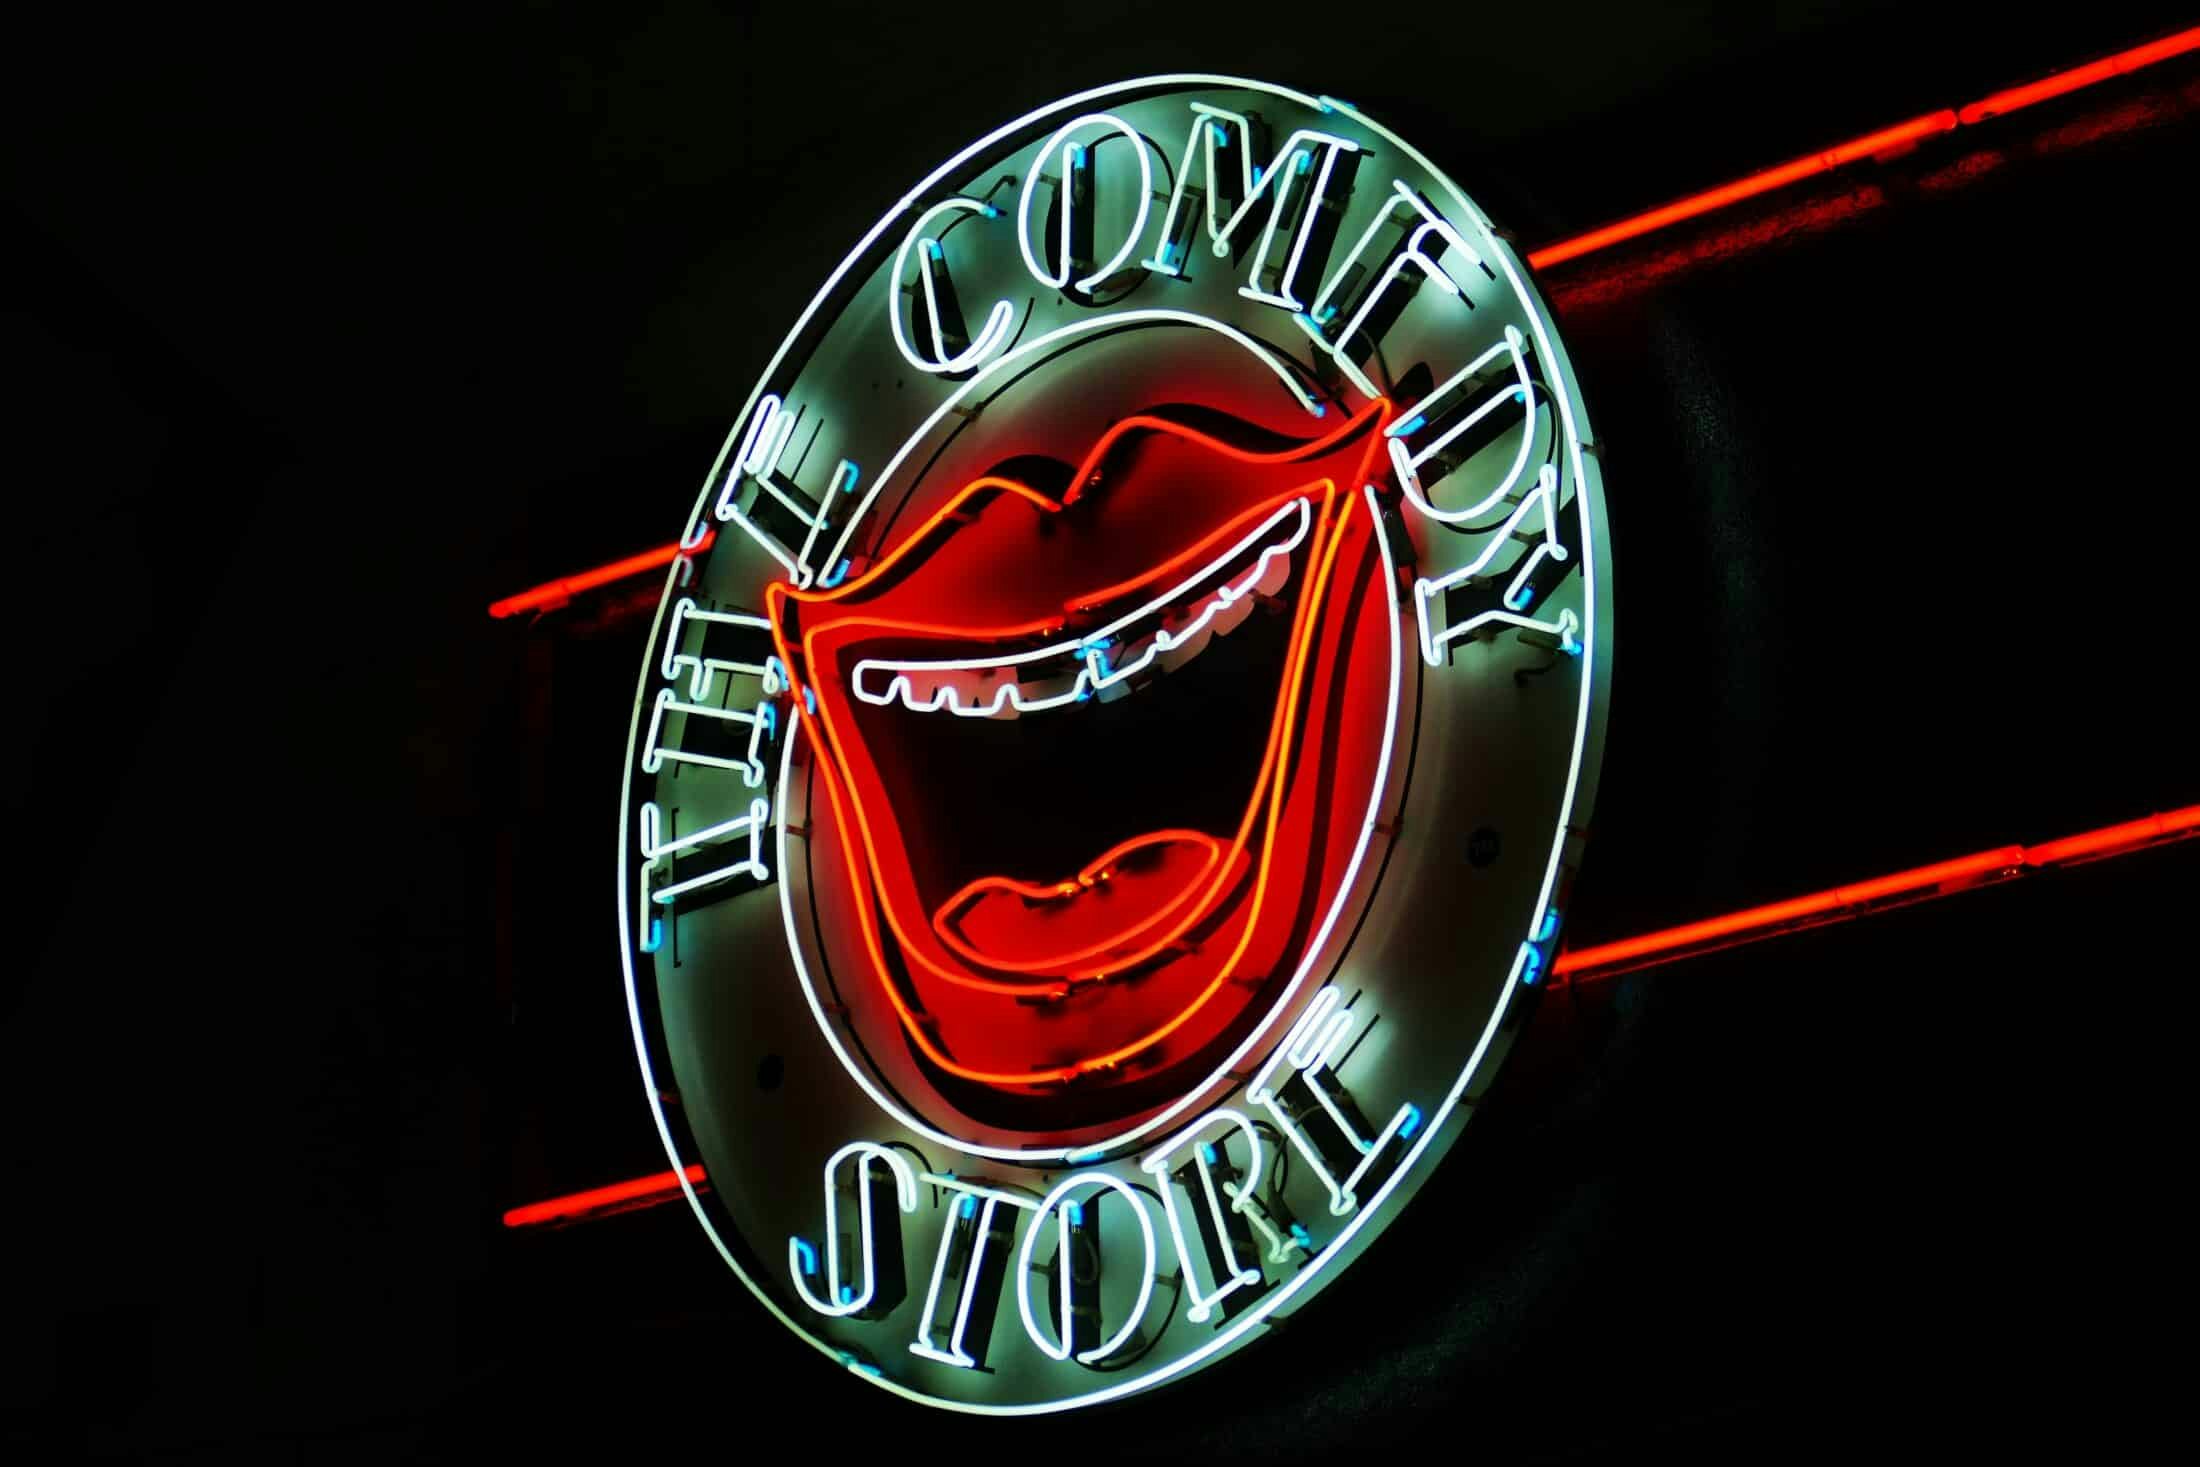 The Comedy Store sign in Soho - one of the top London comedy clubs